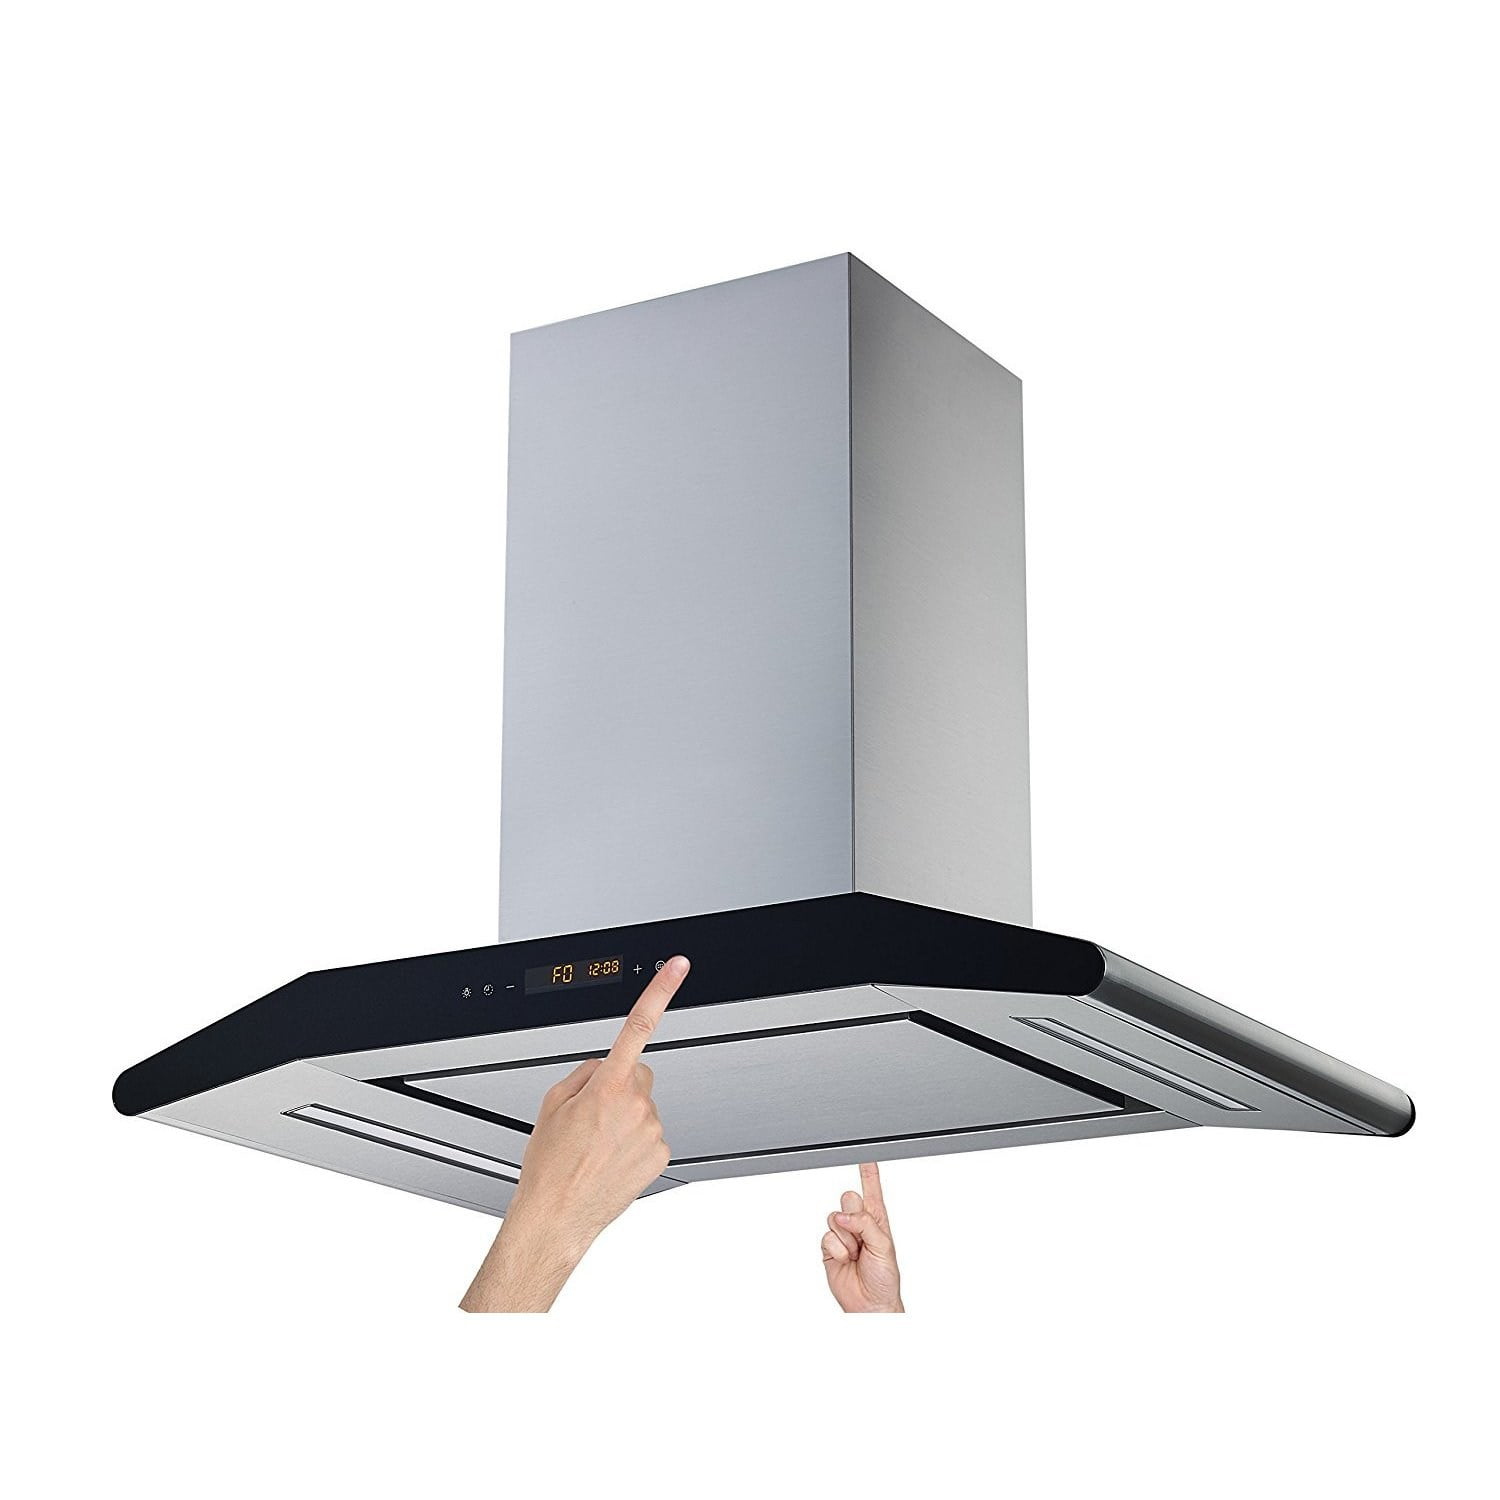 Hermitlux 30 inch Built-In/Insert Range Hood, 600 CFM 3 Speed Vent Hood, Ducted/Ductless Convertible, Stainless Steel Range Hoods with Bright LED